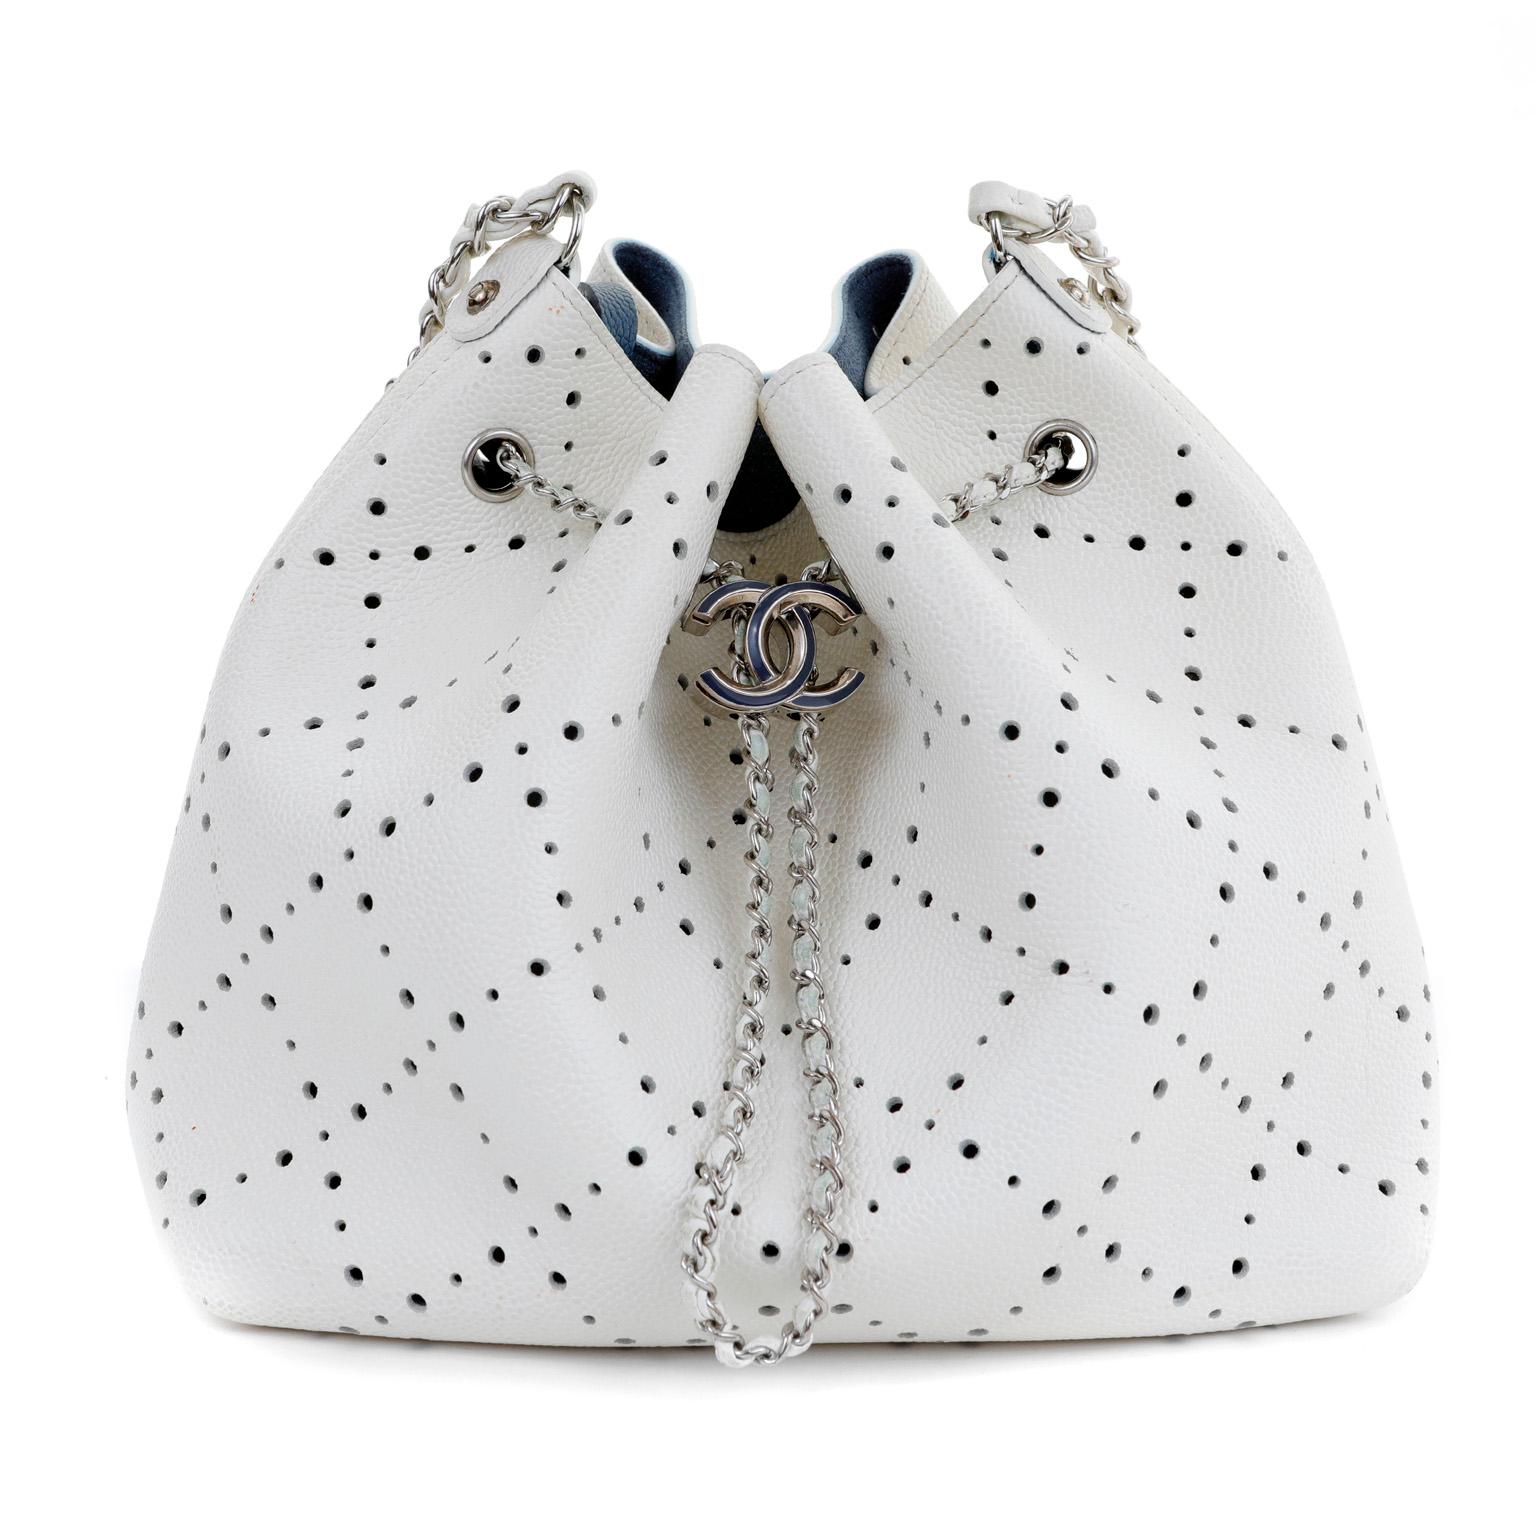 This authentic Chanel White Caviar Perforated Bucket Bag is in pristine condition.  Snowy white caviar leather is textured and durable.  Bucket bag silhouette in perforated diamond pattern allows glimpses of the blue interior. Silver and blue